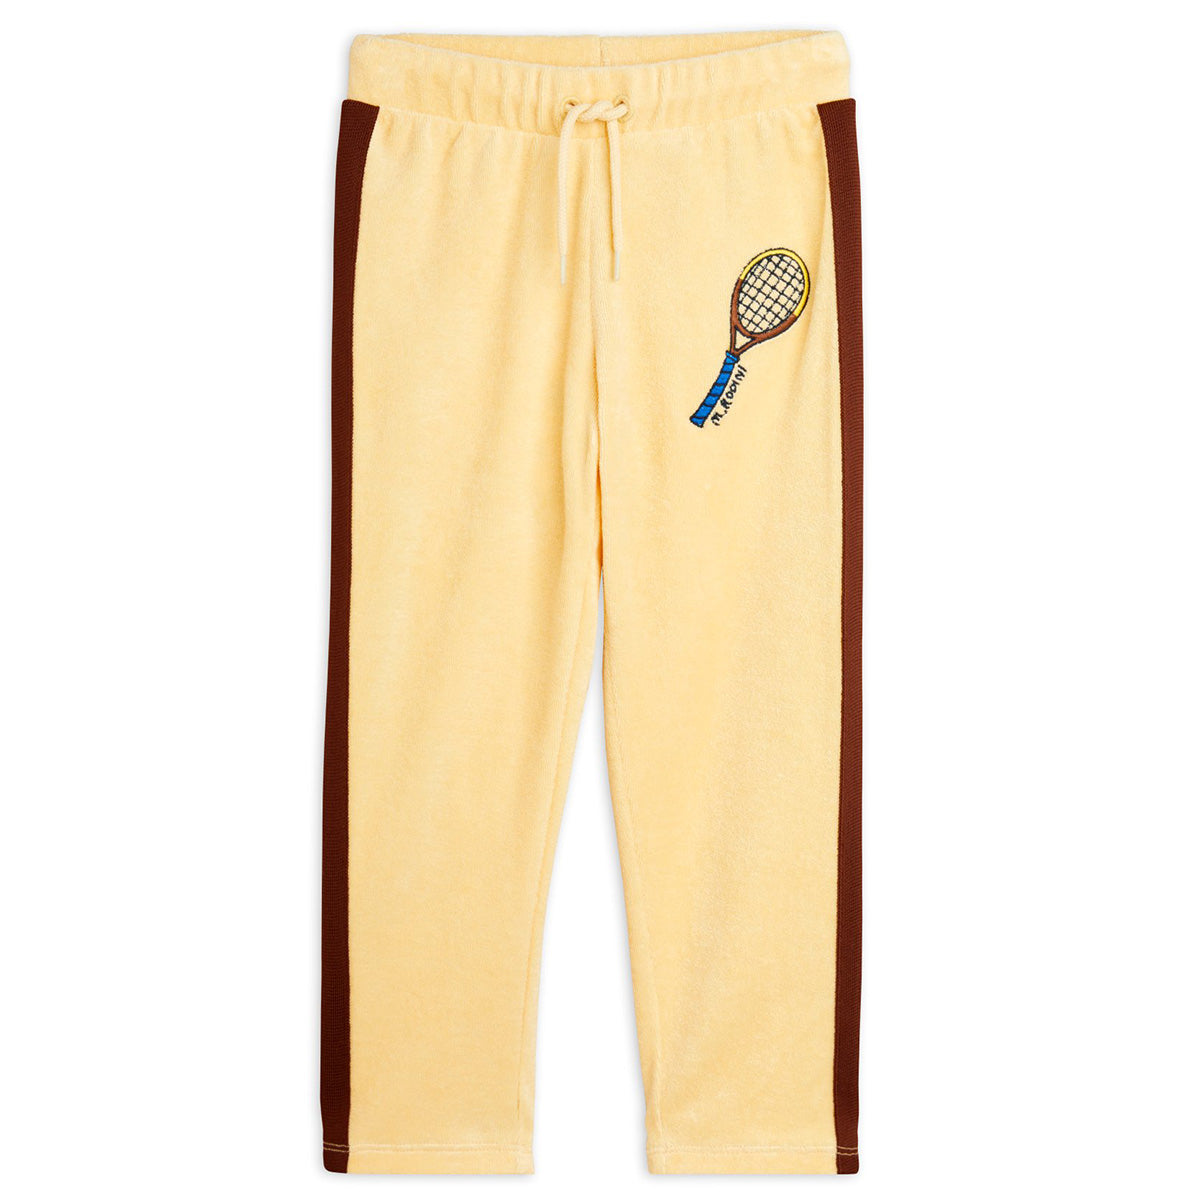 The Tennis Embroidered Pants from Mini Rodini. Embroidered Tennis motif, Stripe detailing along legs